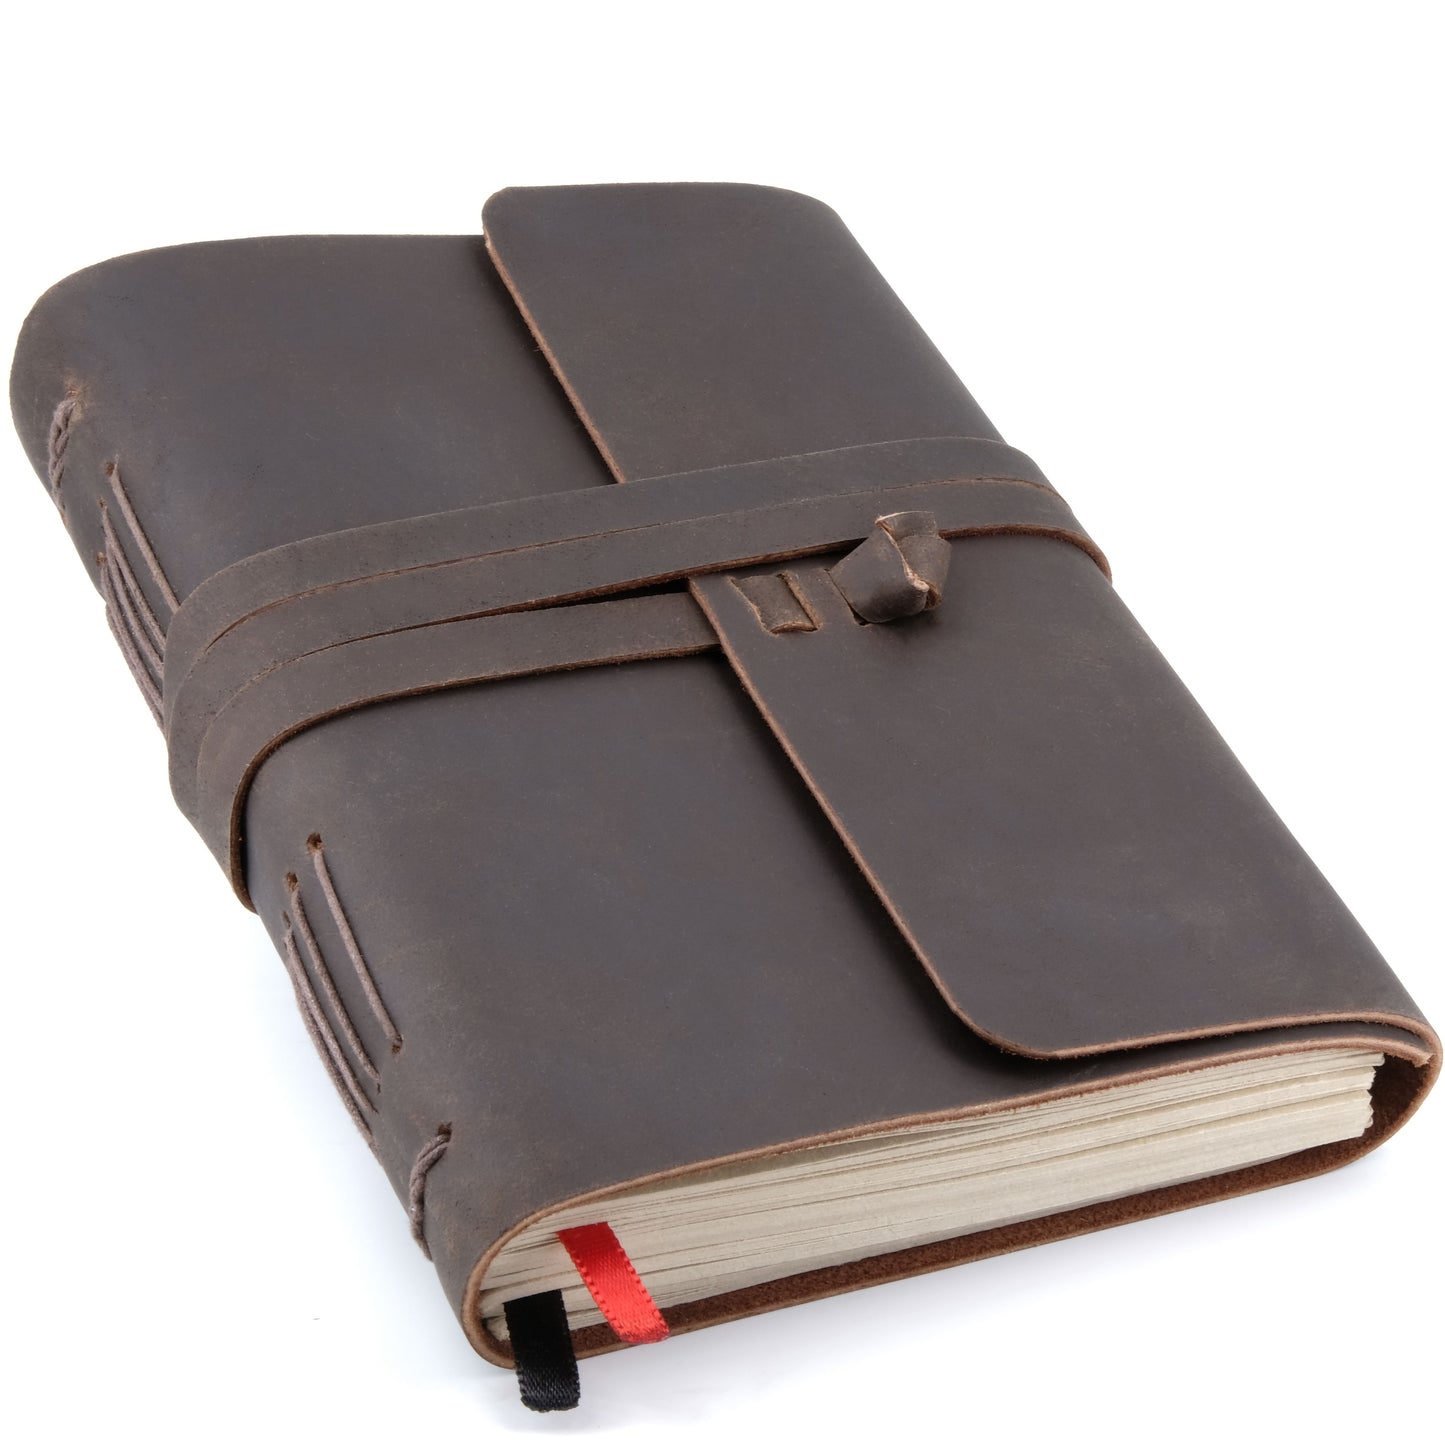 Leather Journal with Lined Pages - Leather Bound Writing Journal for Men & Women (5x7 in)